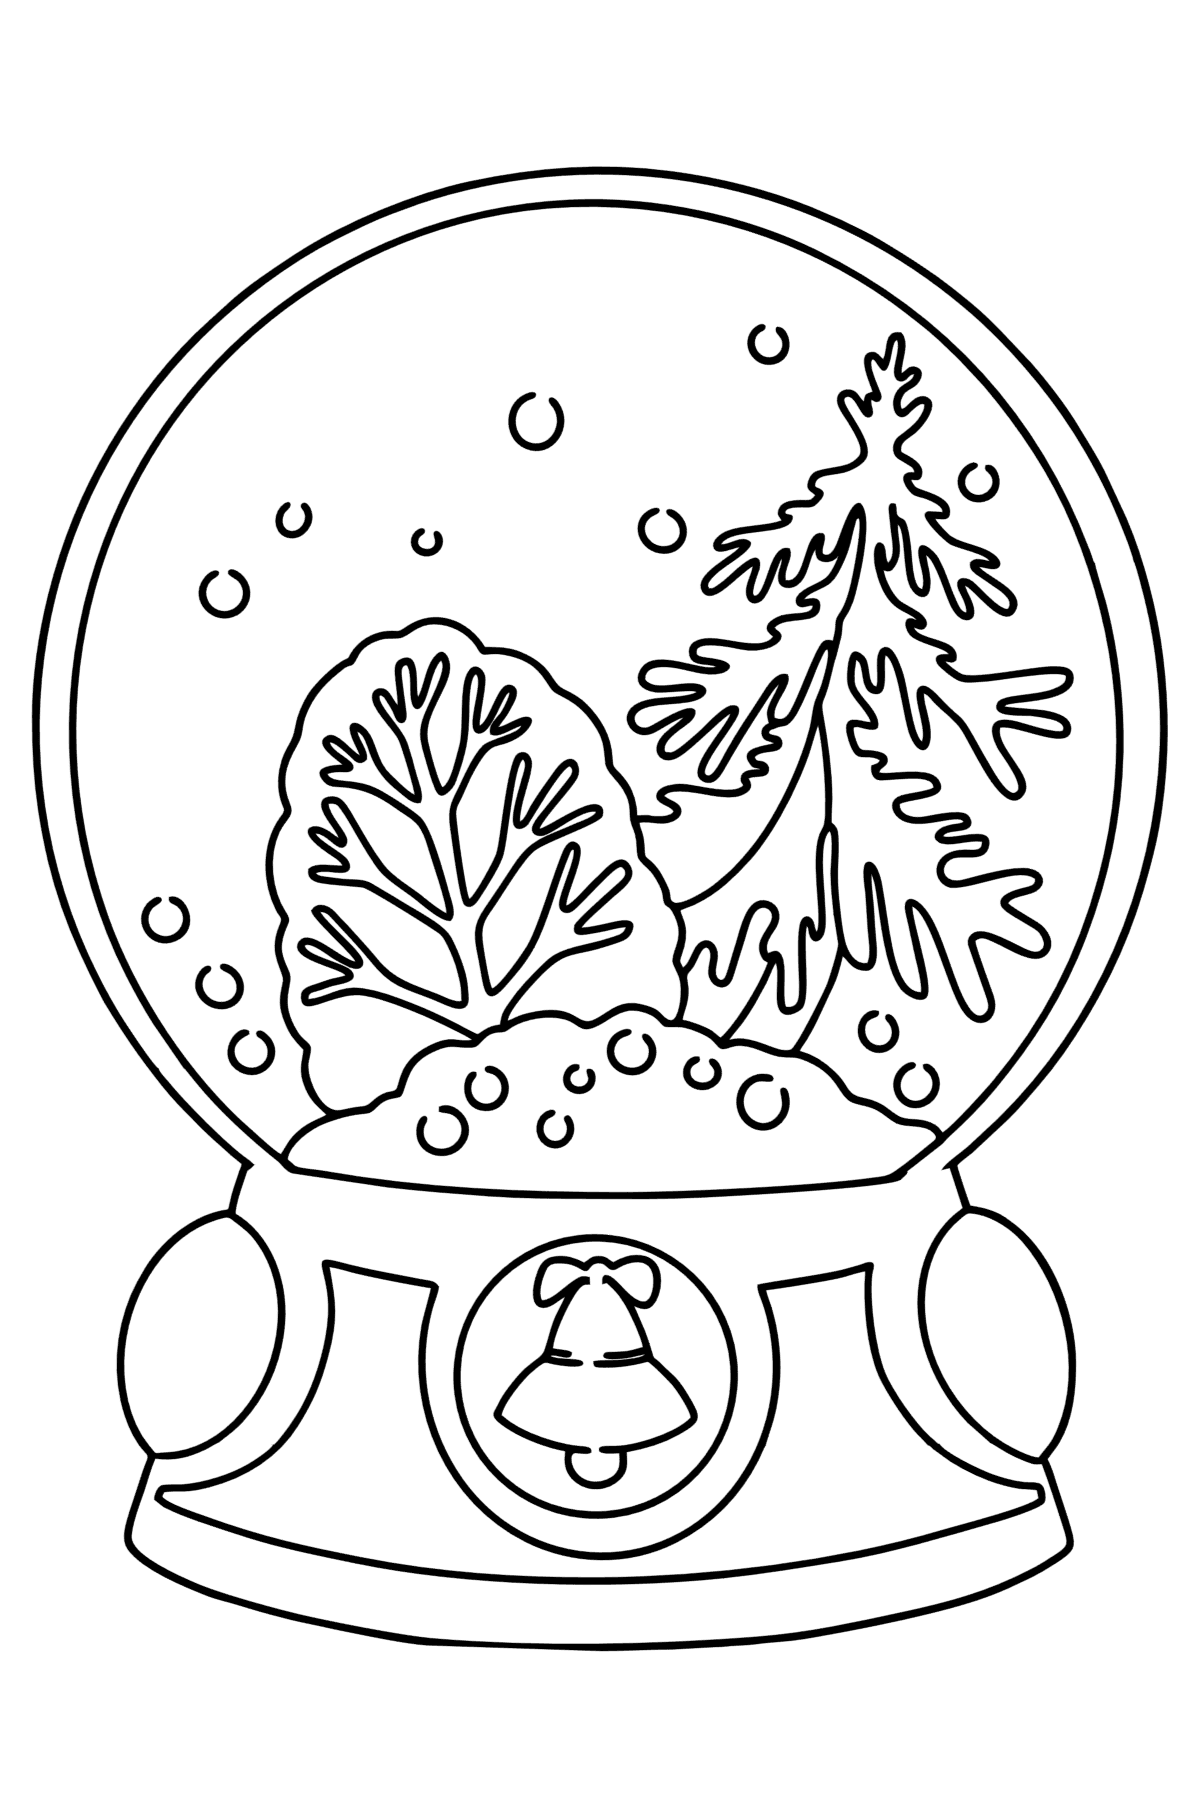 Snow Globe coloring page - Coloring Pages for Kids